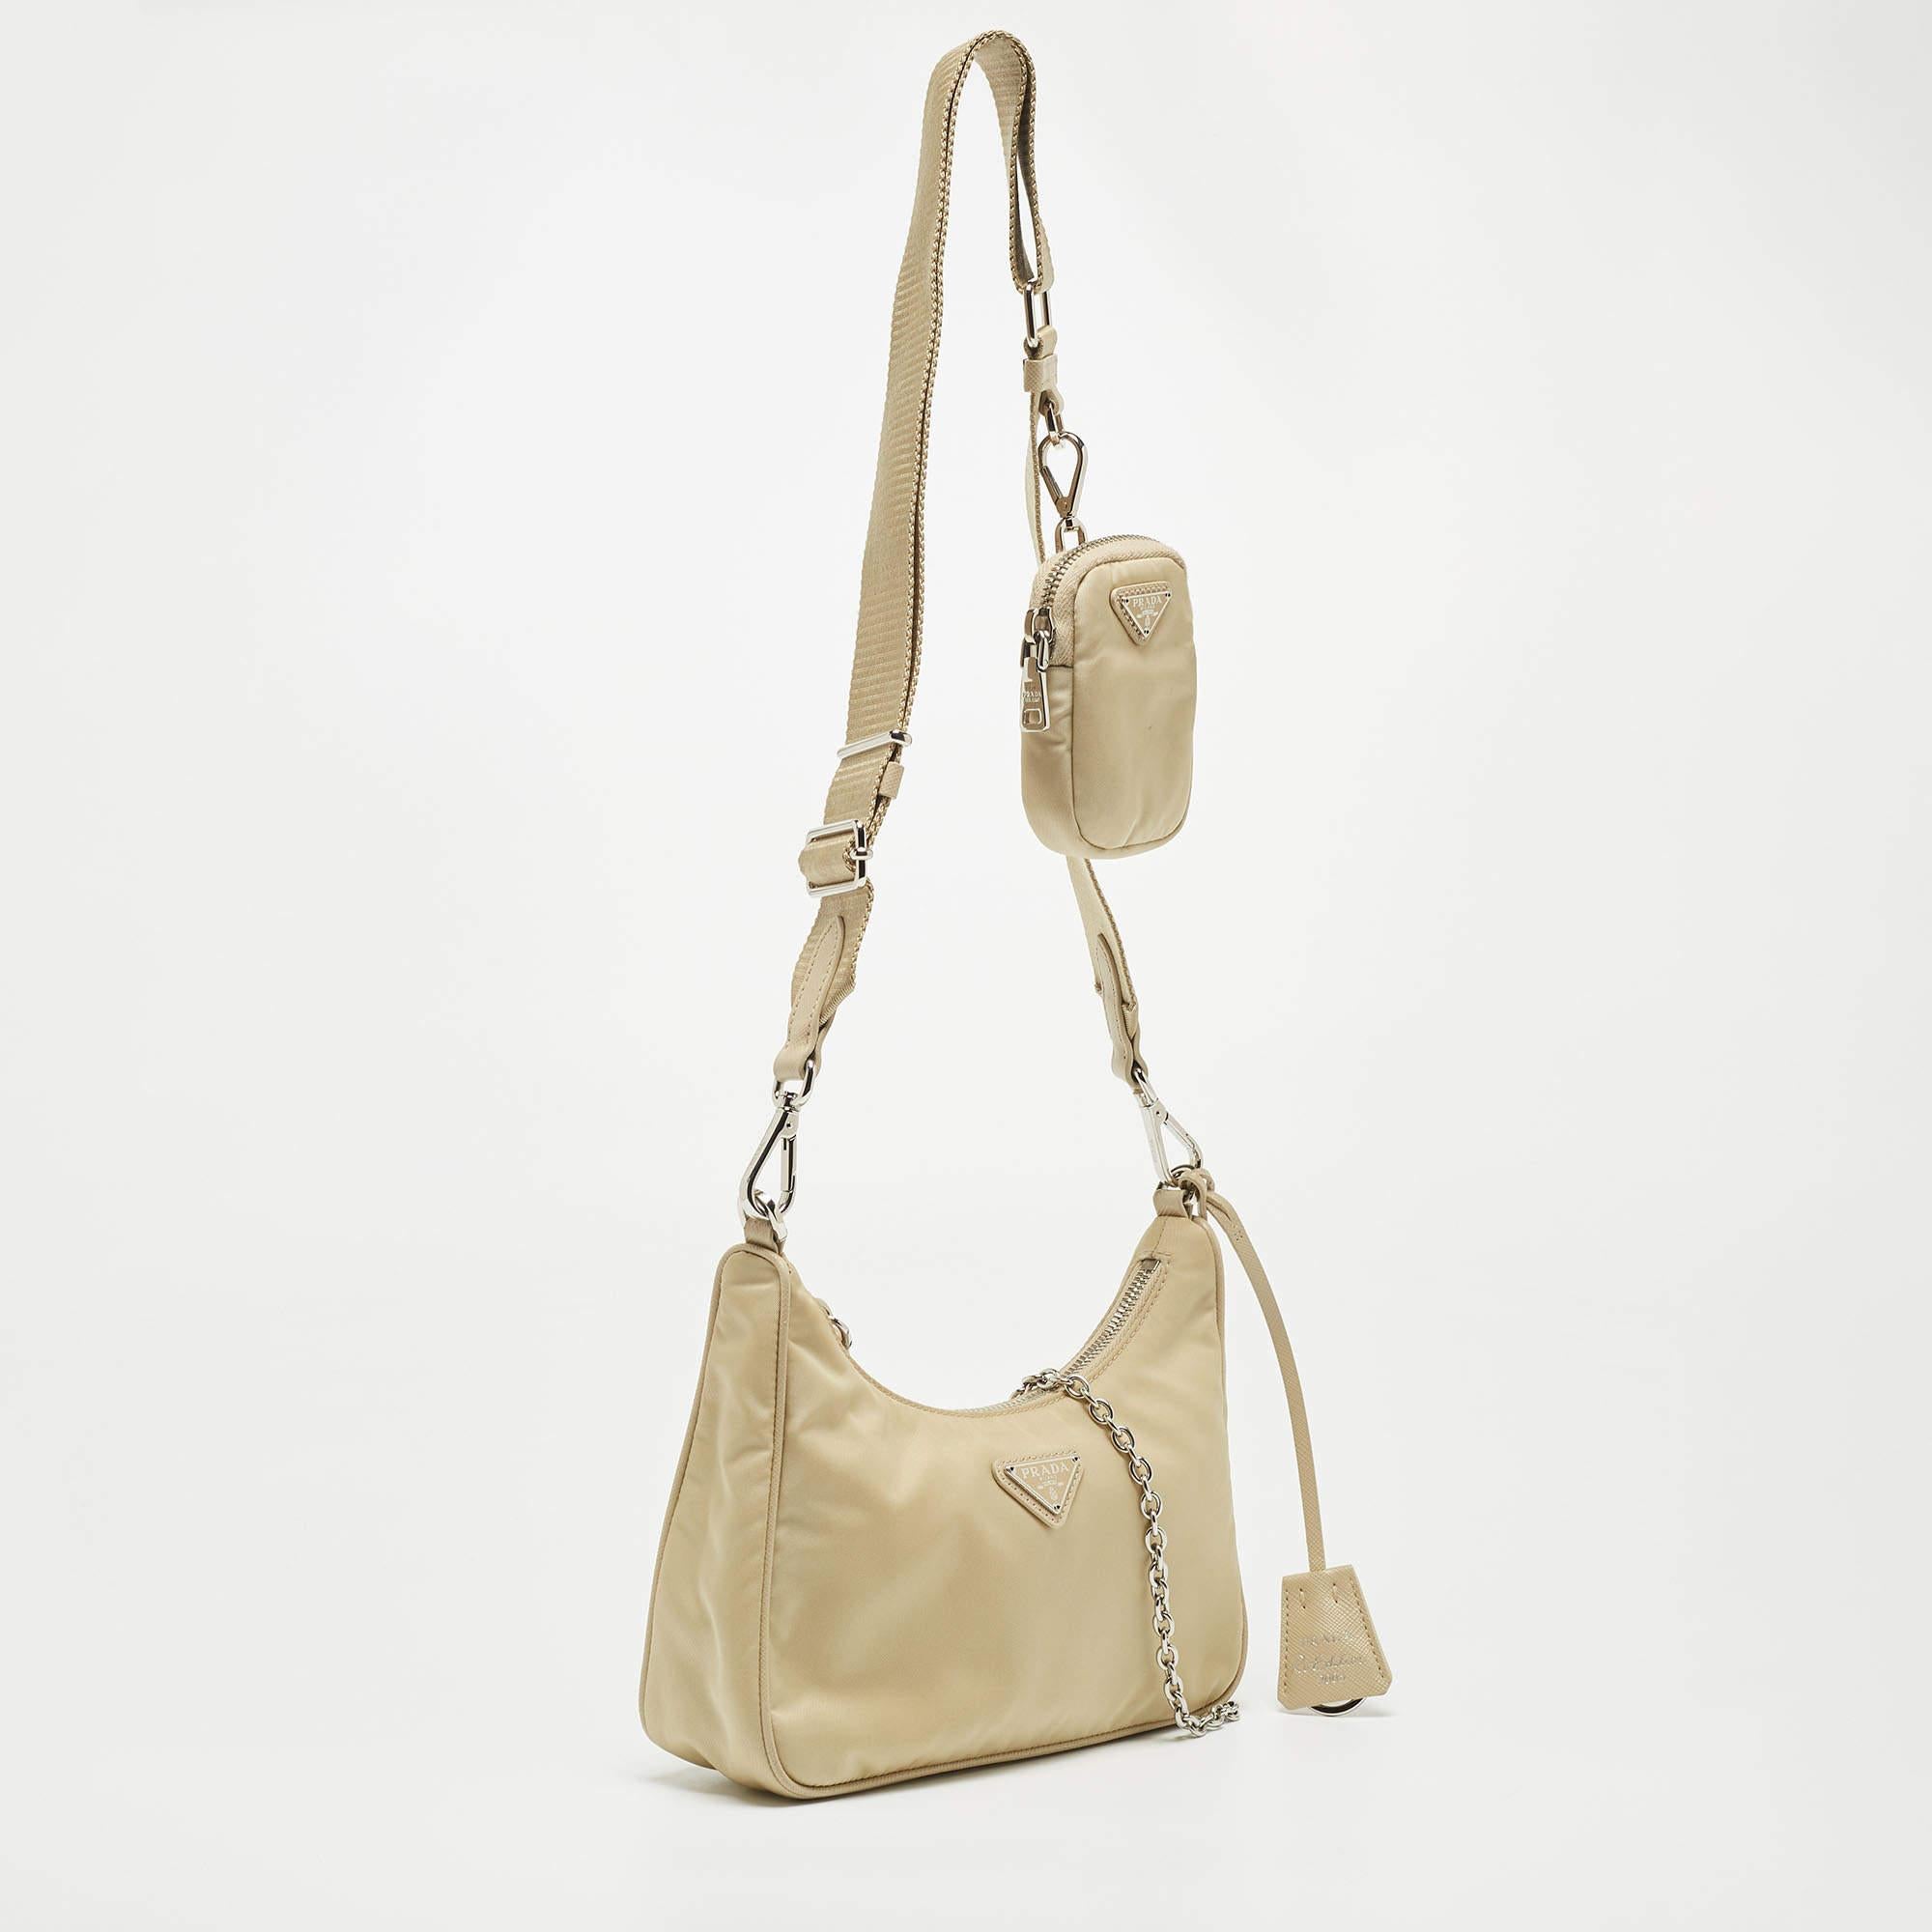 The petite silhouette and classic elements made the Prada Re-Edition 2005 bag an instant hit among fashionistas. Inspired by the classic mini hobo bag, this beige creation comes made from nylon and features a single handle at the top. The perfectly